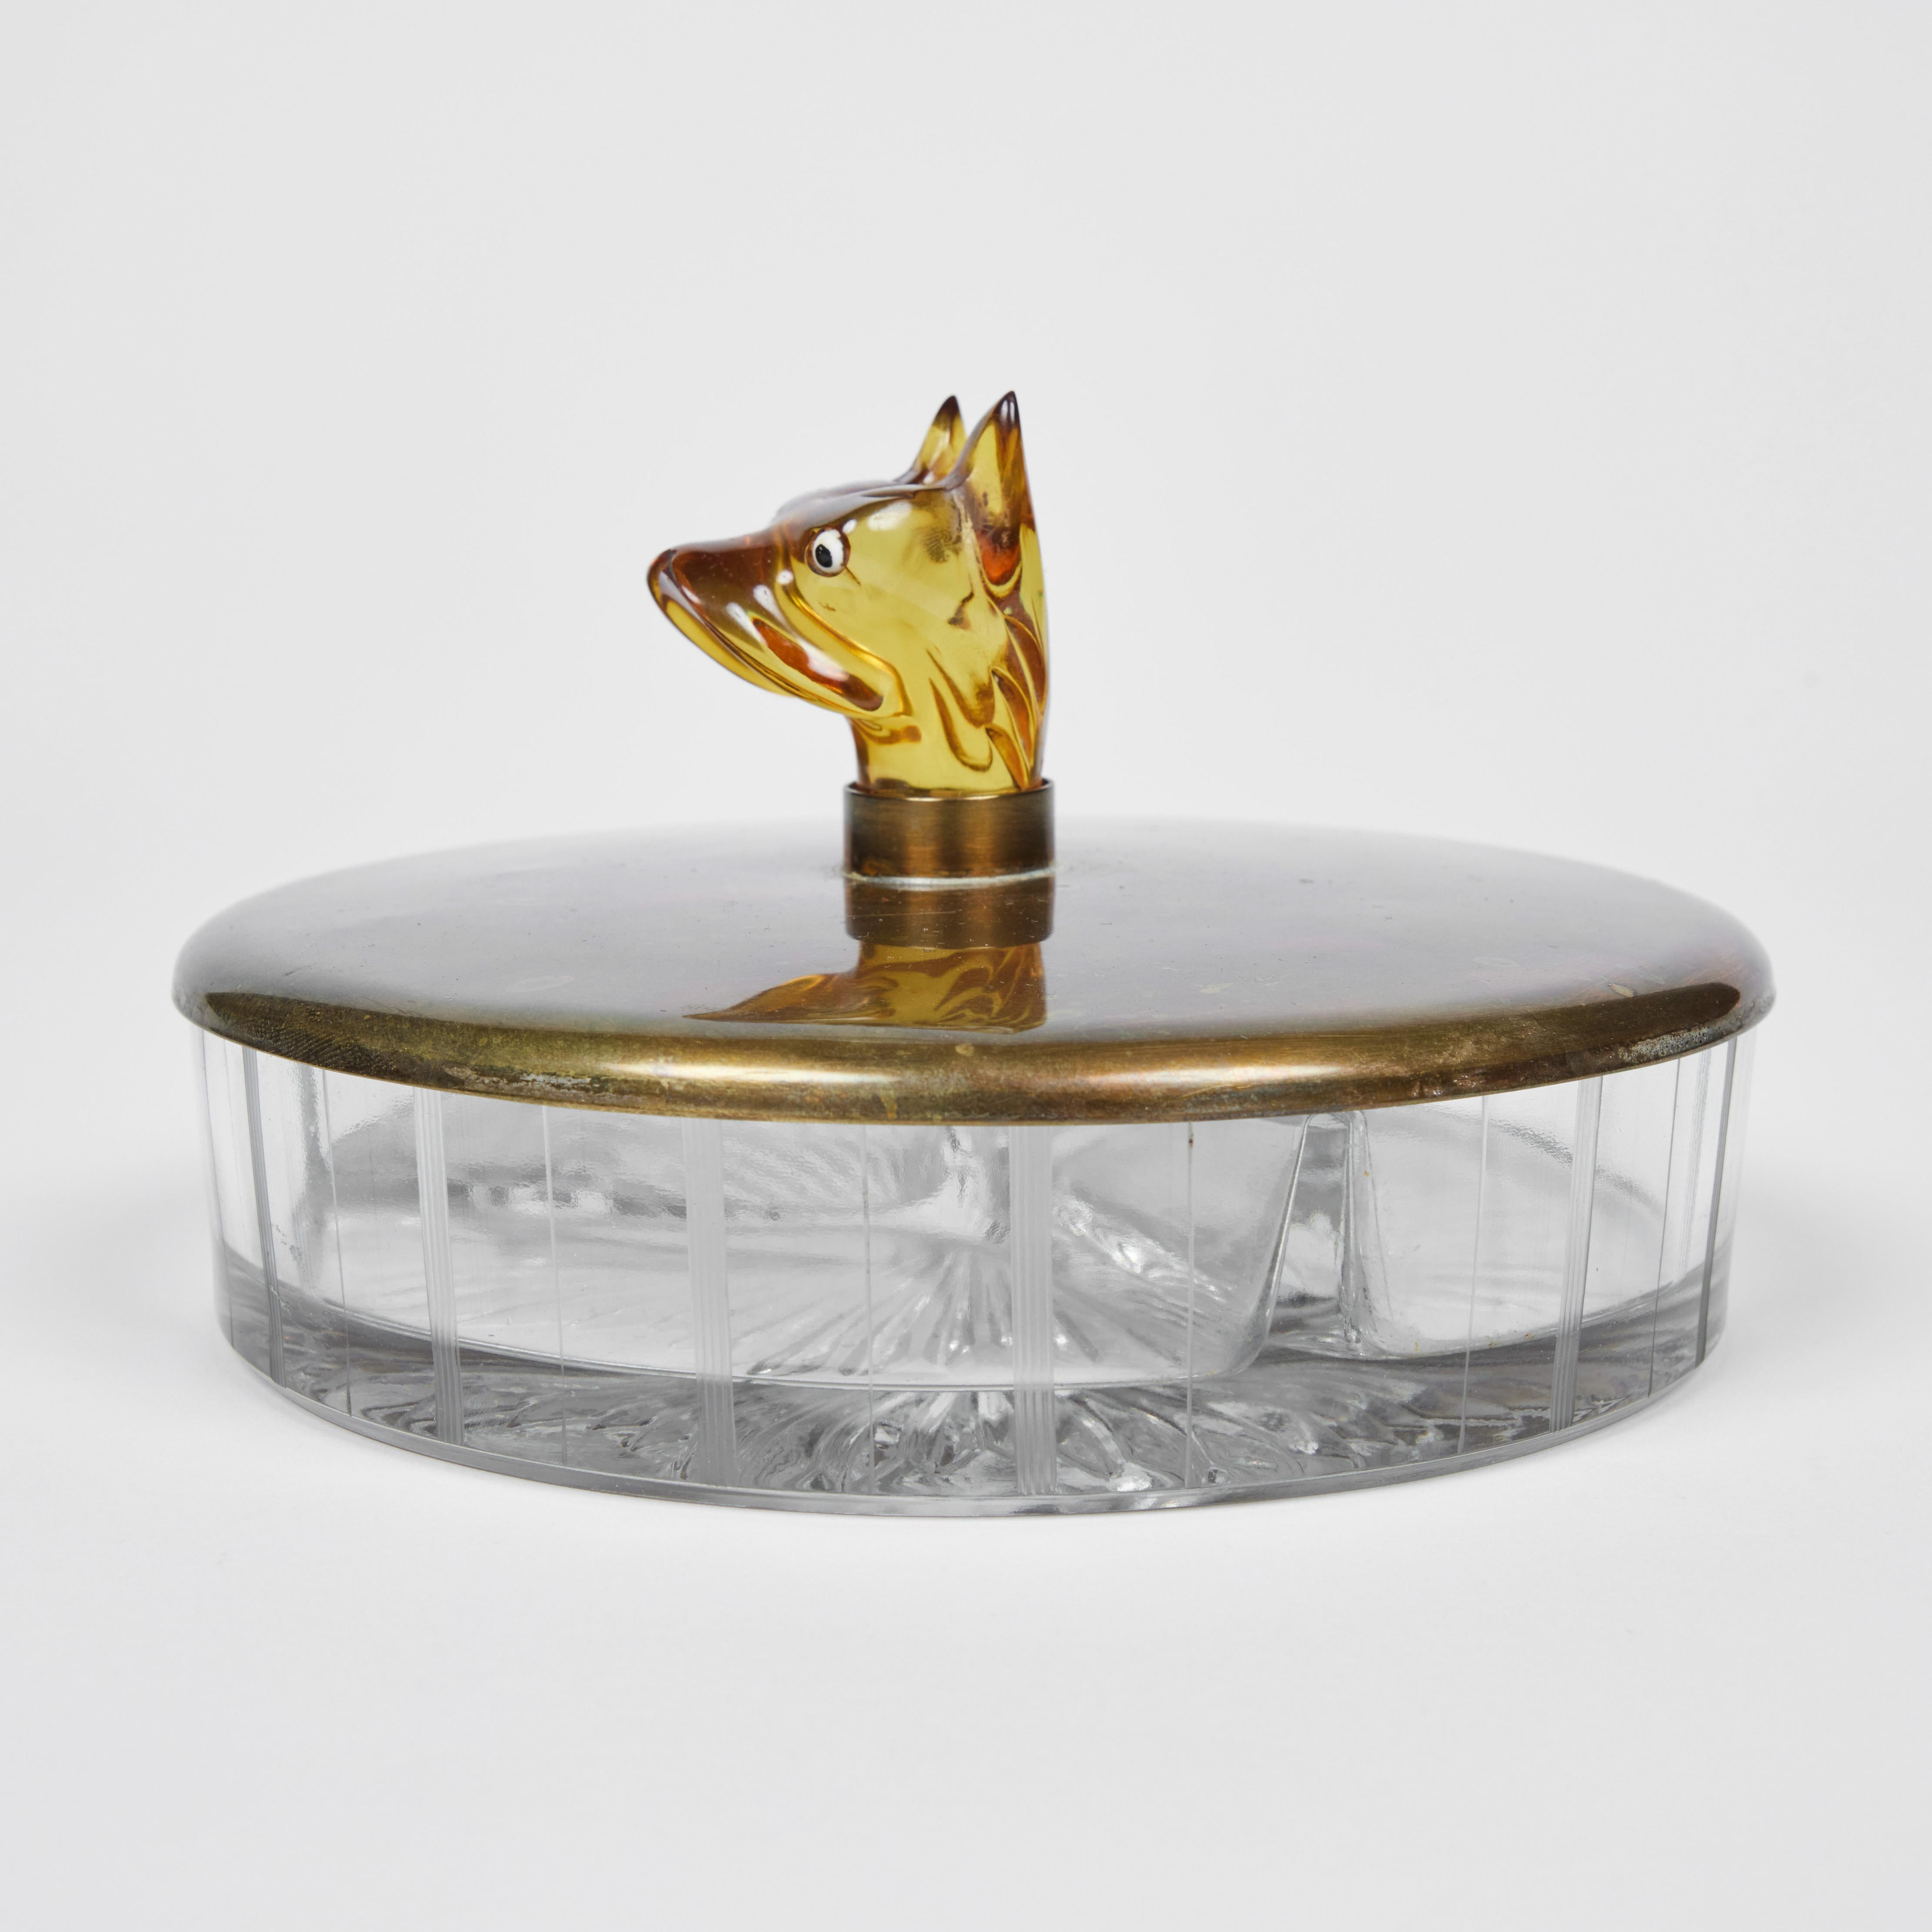 Functional and definitely a conversation piece, this vintage pressed glass dish is so fun. It has 3 sections and a smooth brass lid accented with a clever and beautifully transparent Catalin Boxer dog head handle. What a fun way to display or serve